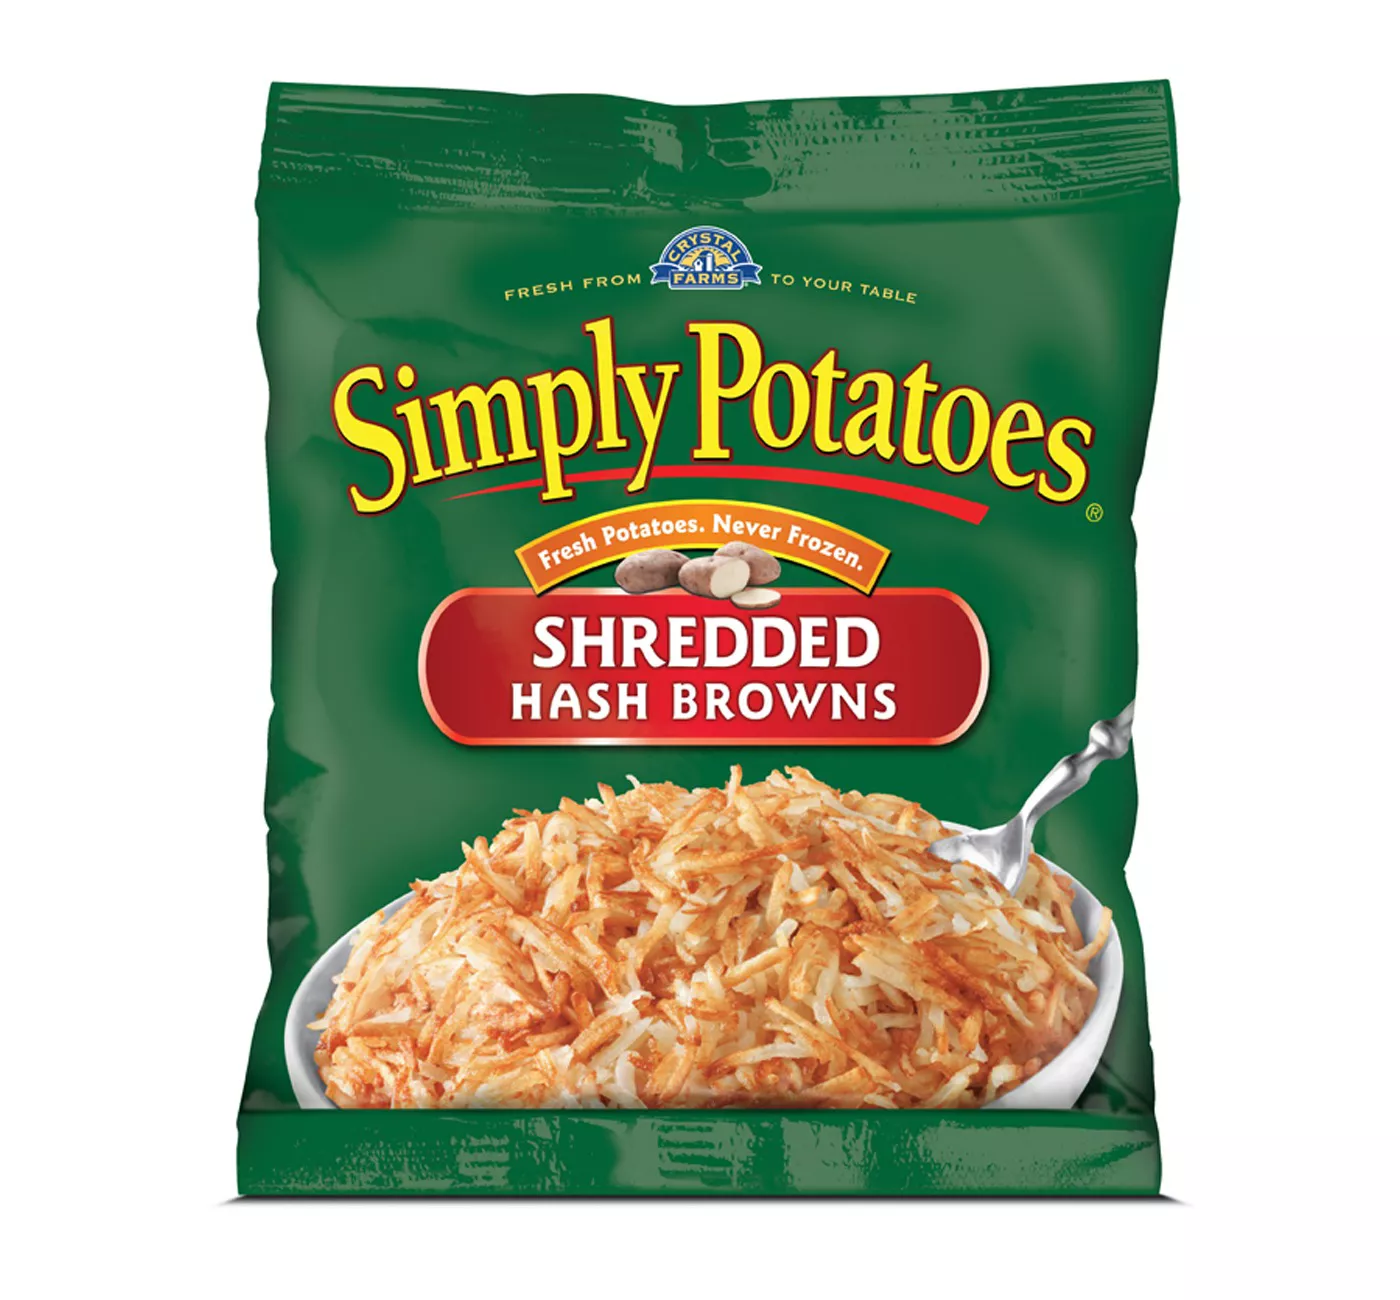 Simply Potatoes Shredded Hash Browns - 20oz - image 1 of 2